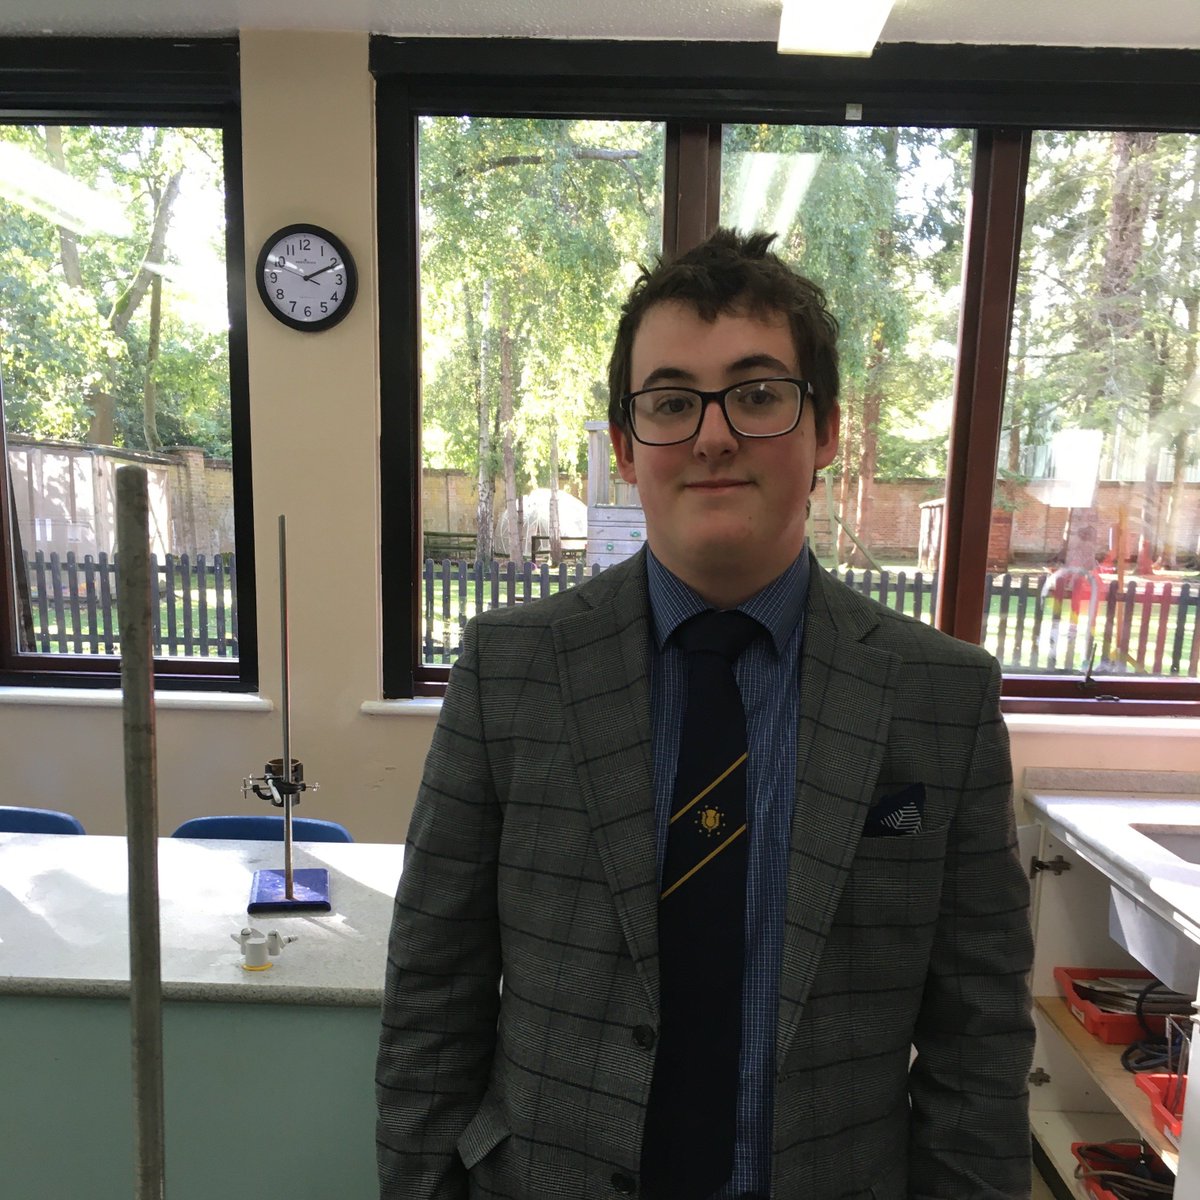 Congratulations to Sam in the Upper Sixth for completing an amazing 375 (and counting) day streak on the Isaac Physics platform, tackling challenging and novel problems. #CokethorpeAmbition #CokethorpePhysics